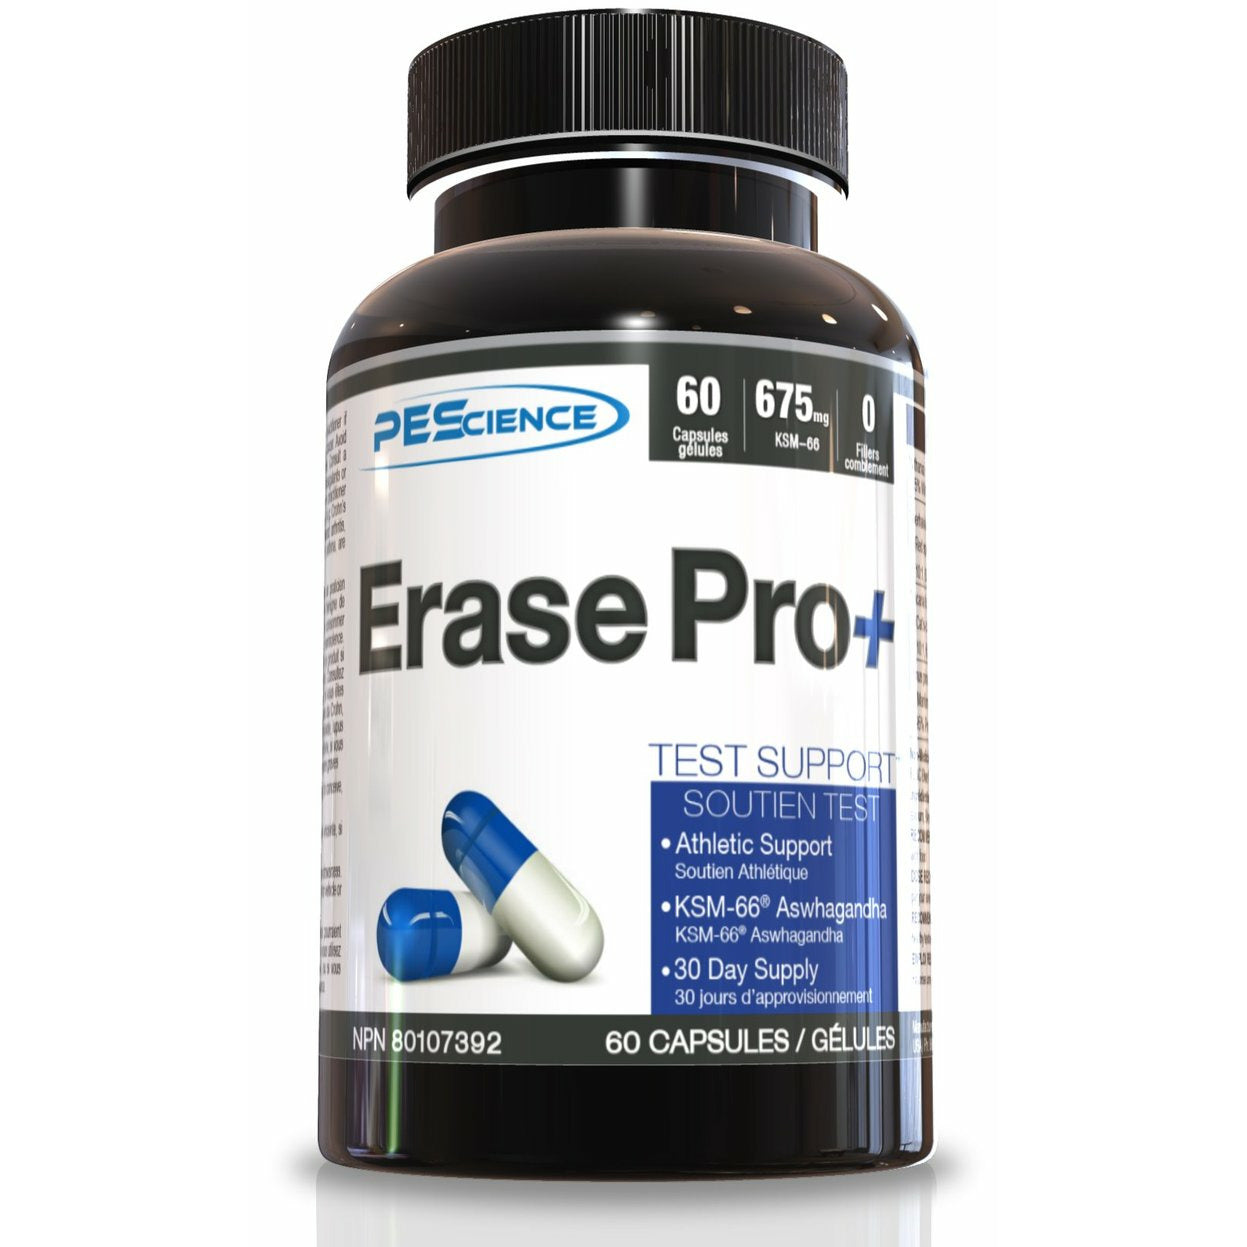 PEScience Erase Pro+ 60 capsules BEST BY 04/24 PEScience Top Nutrition Canada